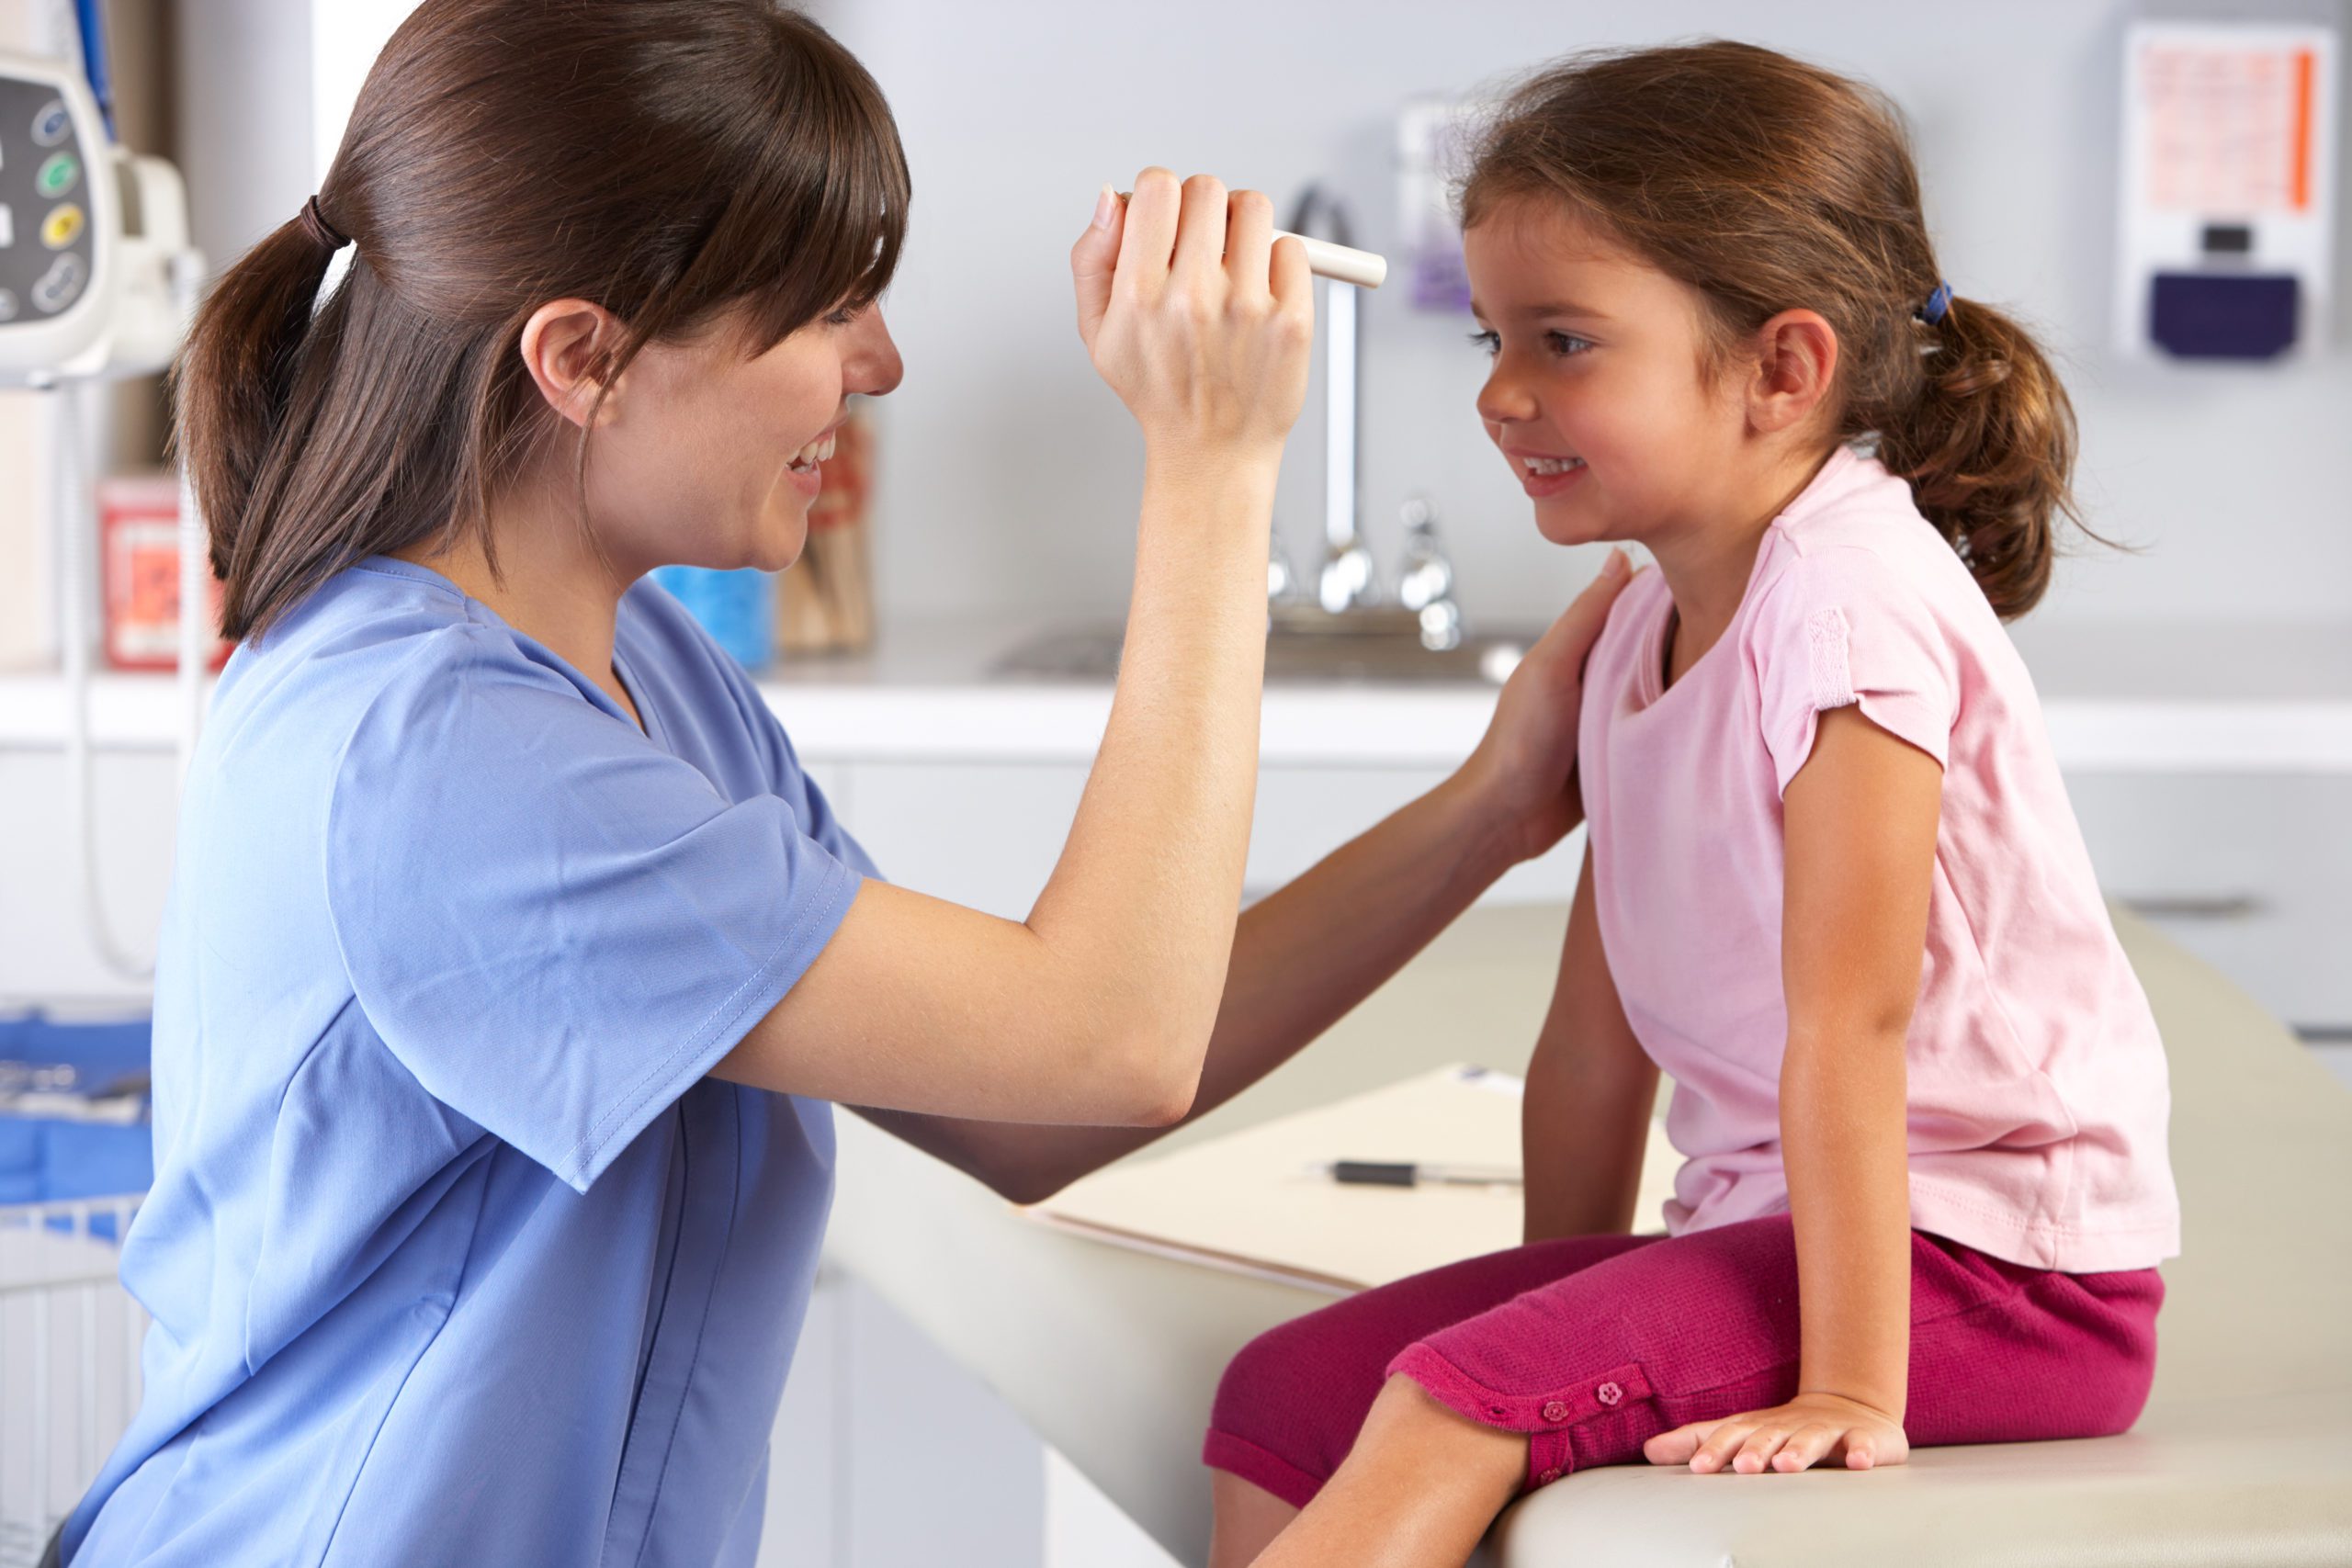 Pediatrician examining a young child in a doctor's office.